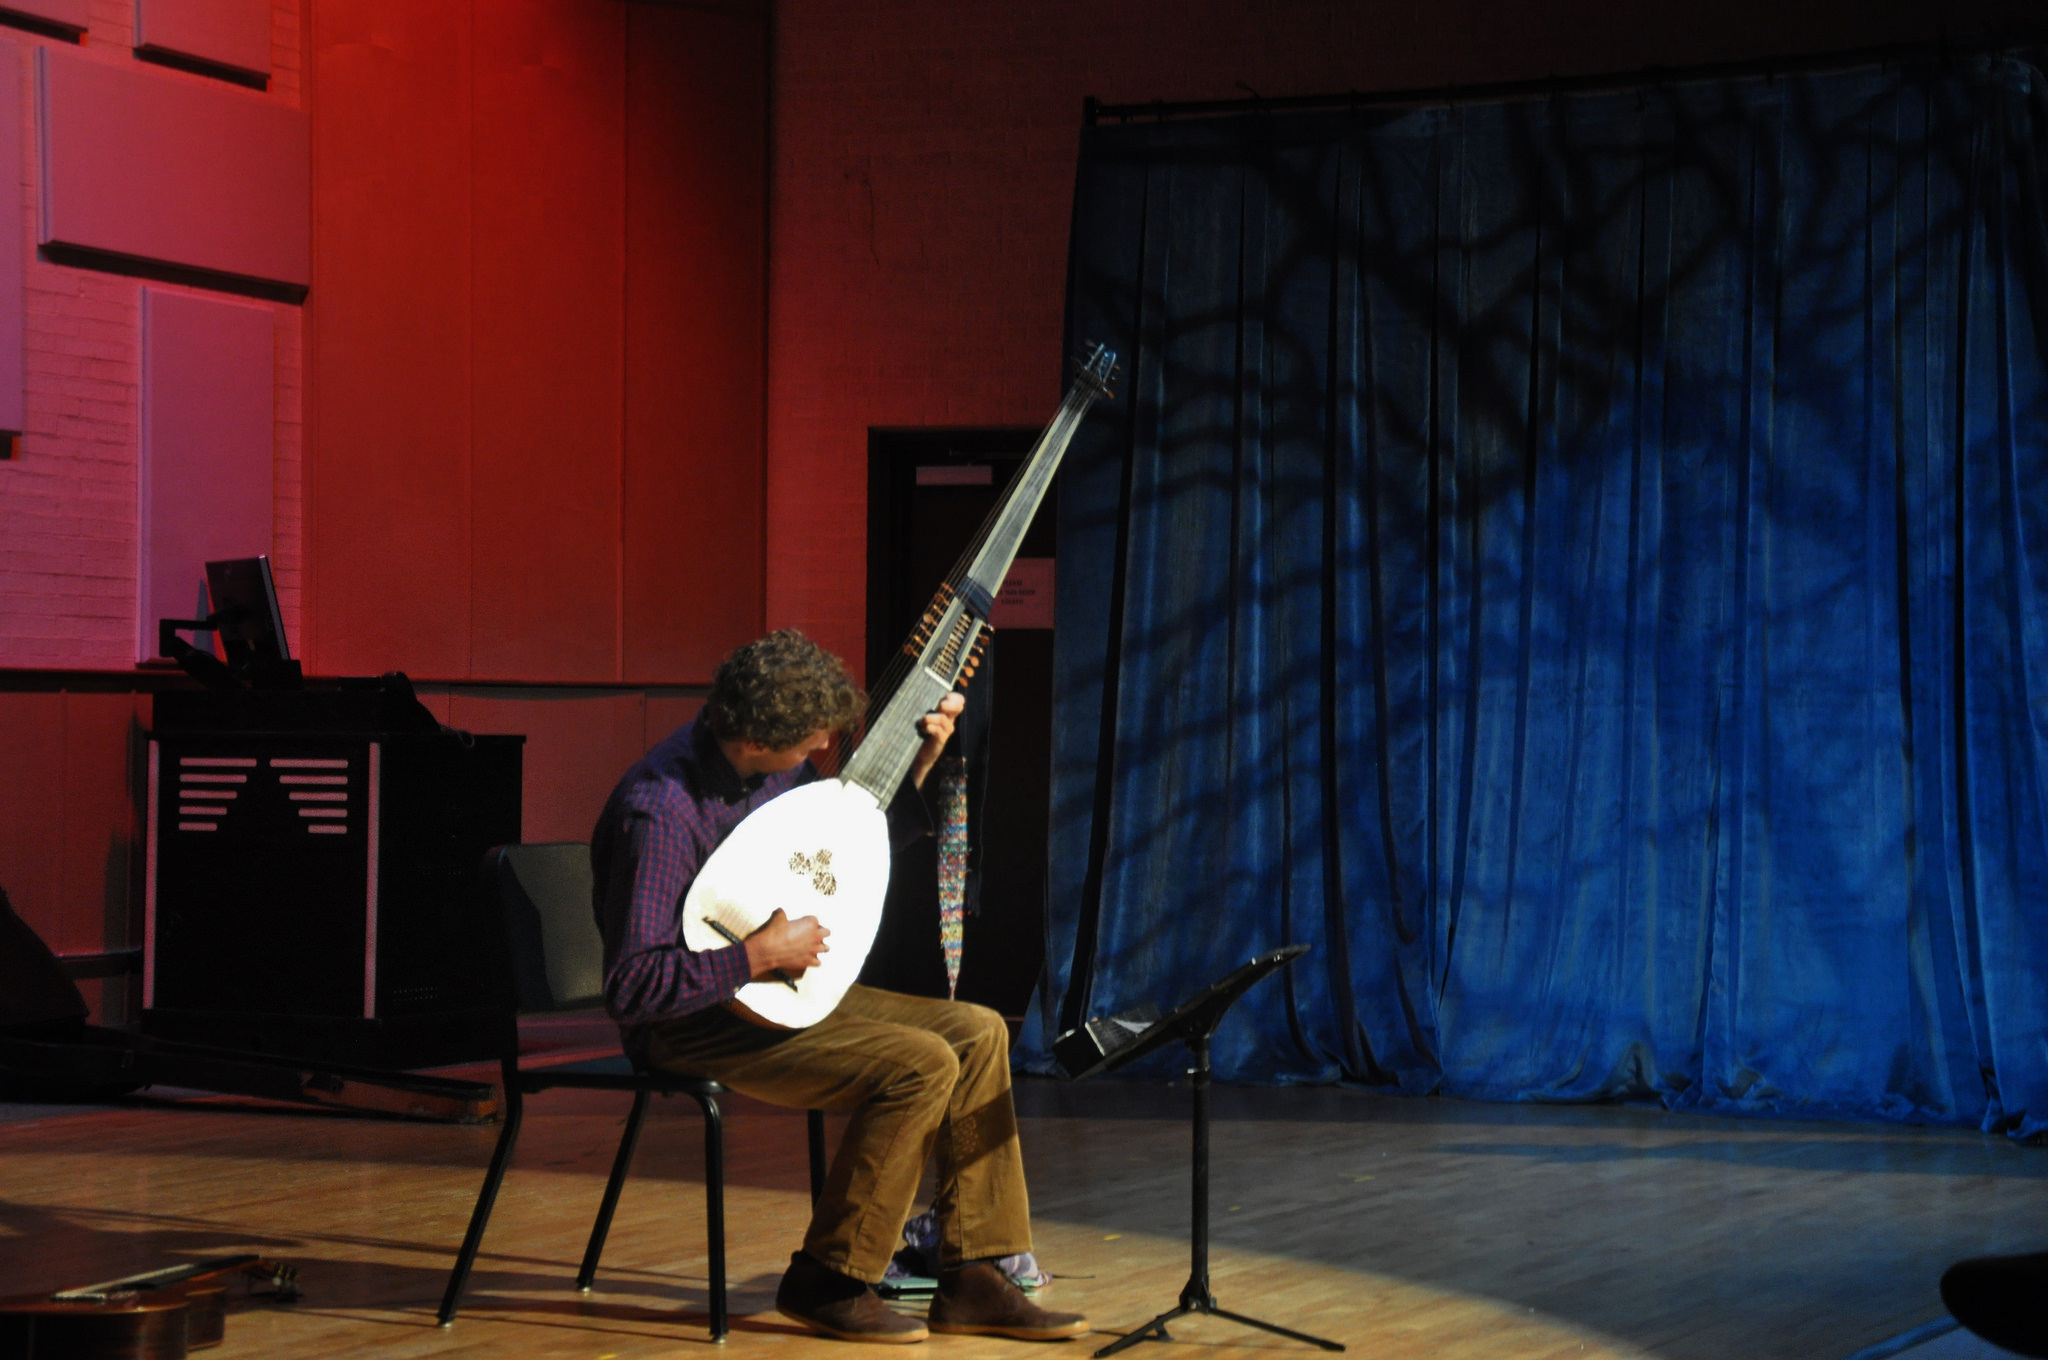 Dominic Schaner warms up pre-performance with his lute at Palomar on Feb. 18 in room D-10, 12 pm. (Aaron Fortin/The Telescope)